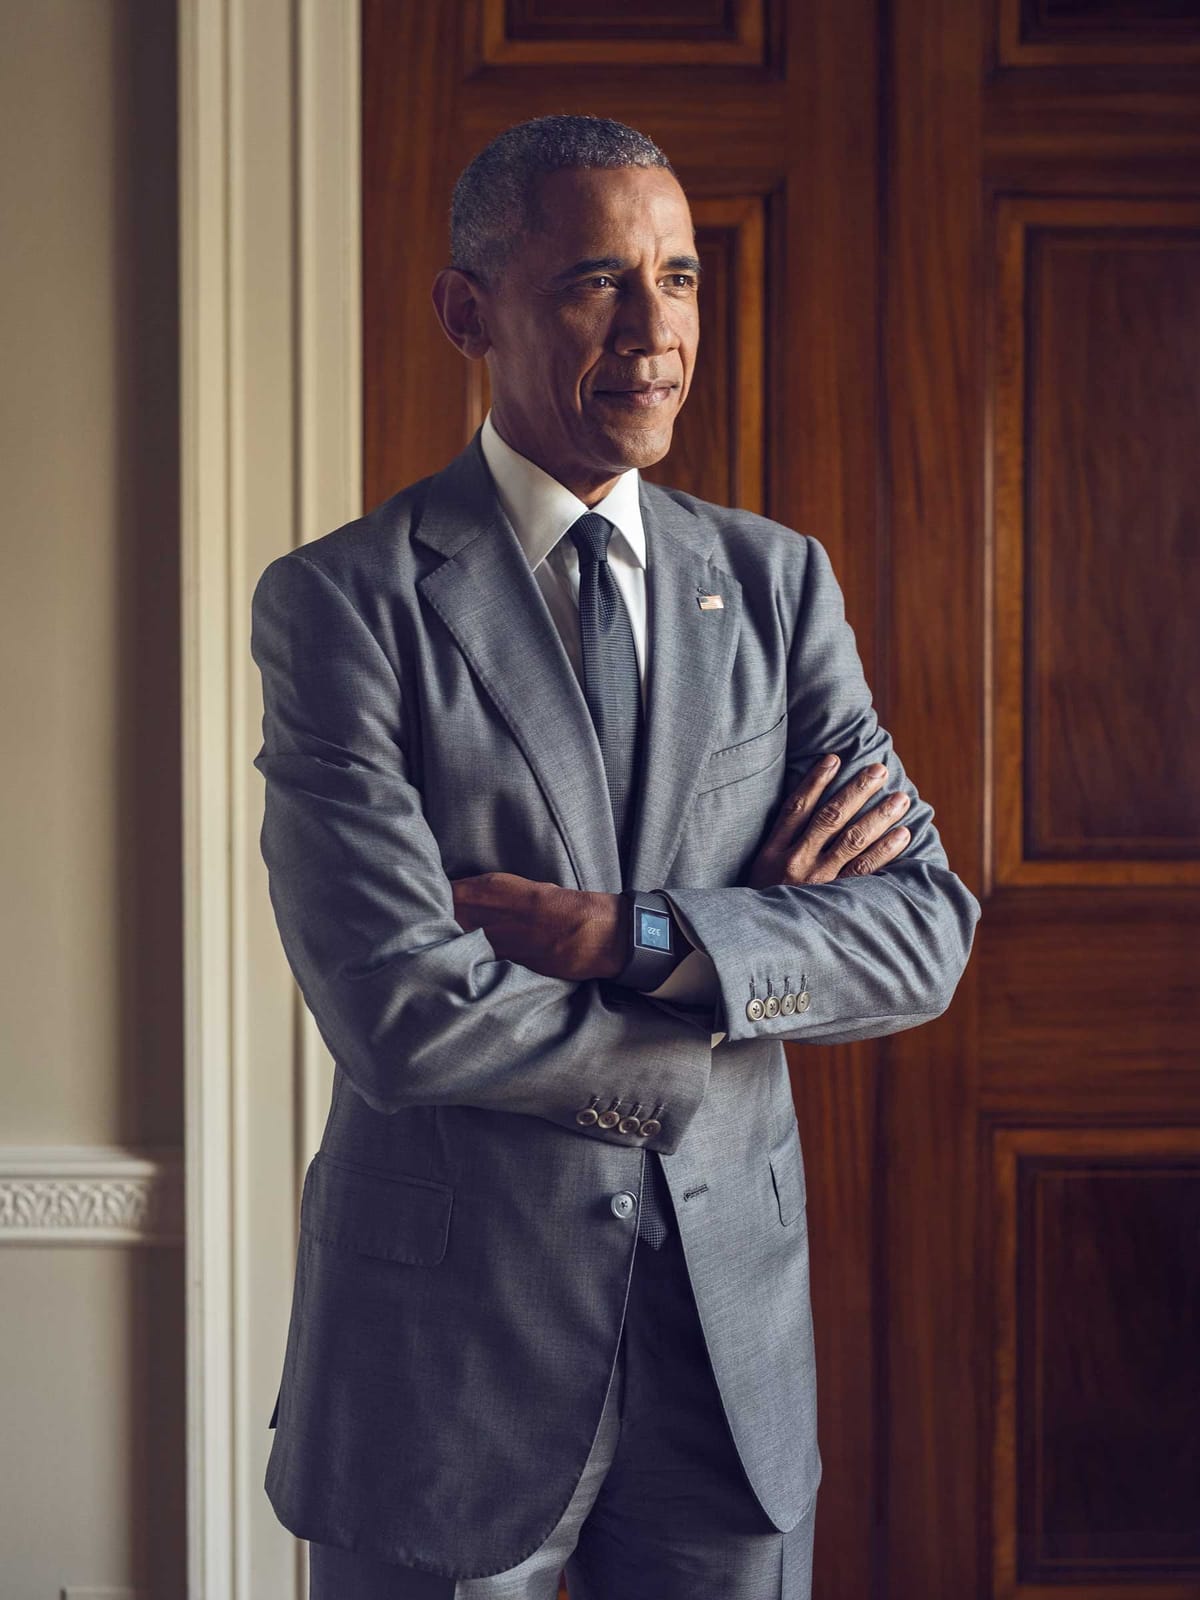 Barack Obama: Fitbit Surge wearer and guest-editor of Wired for November 2016